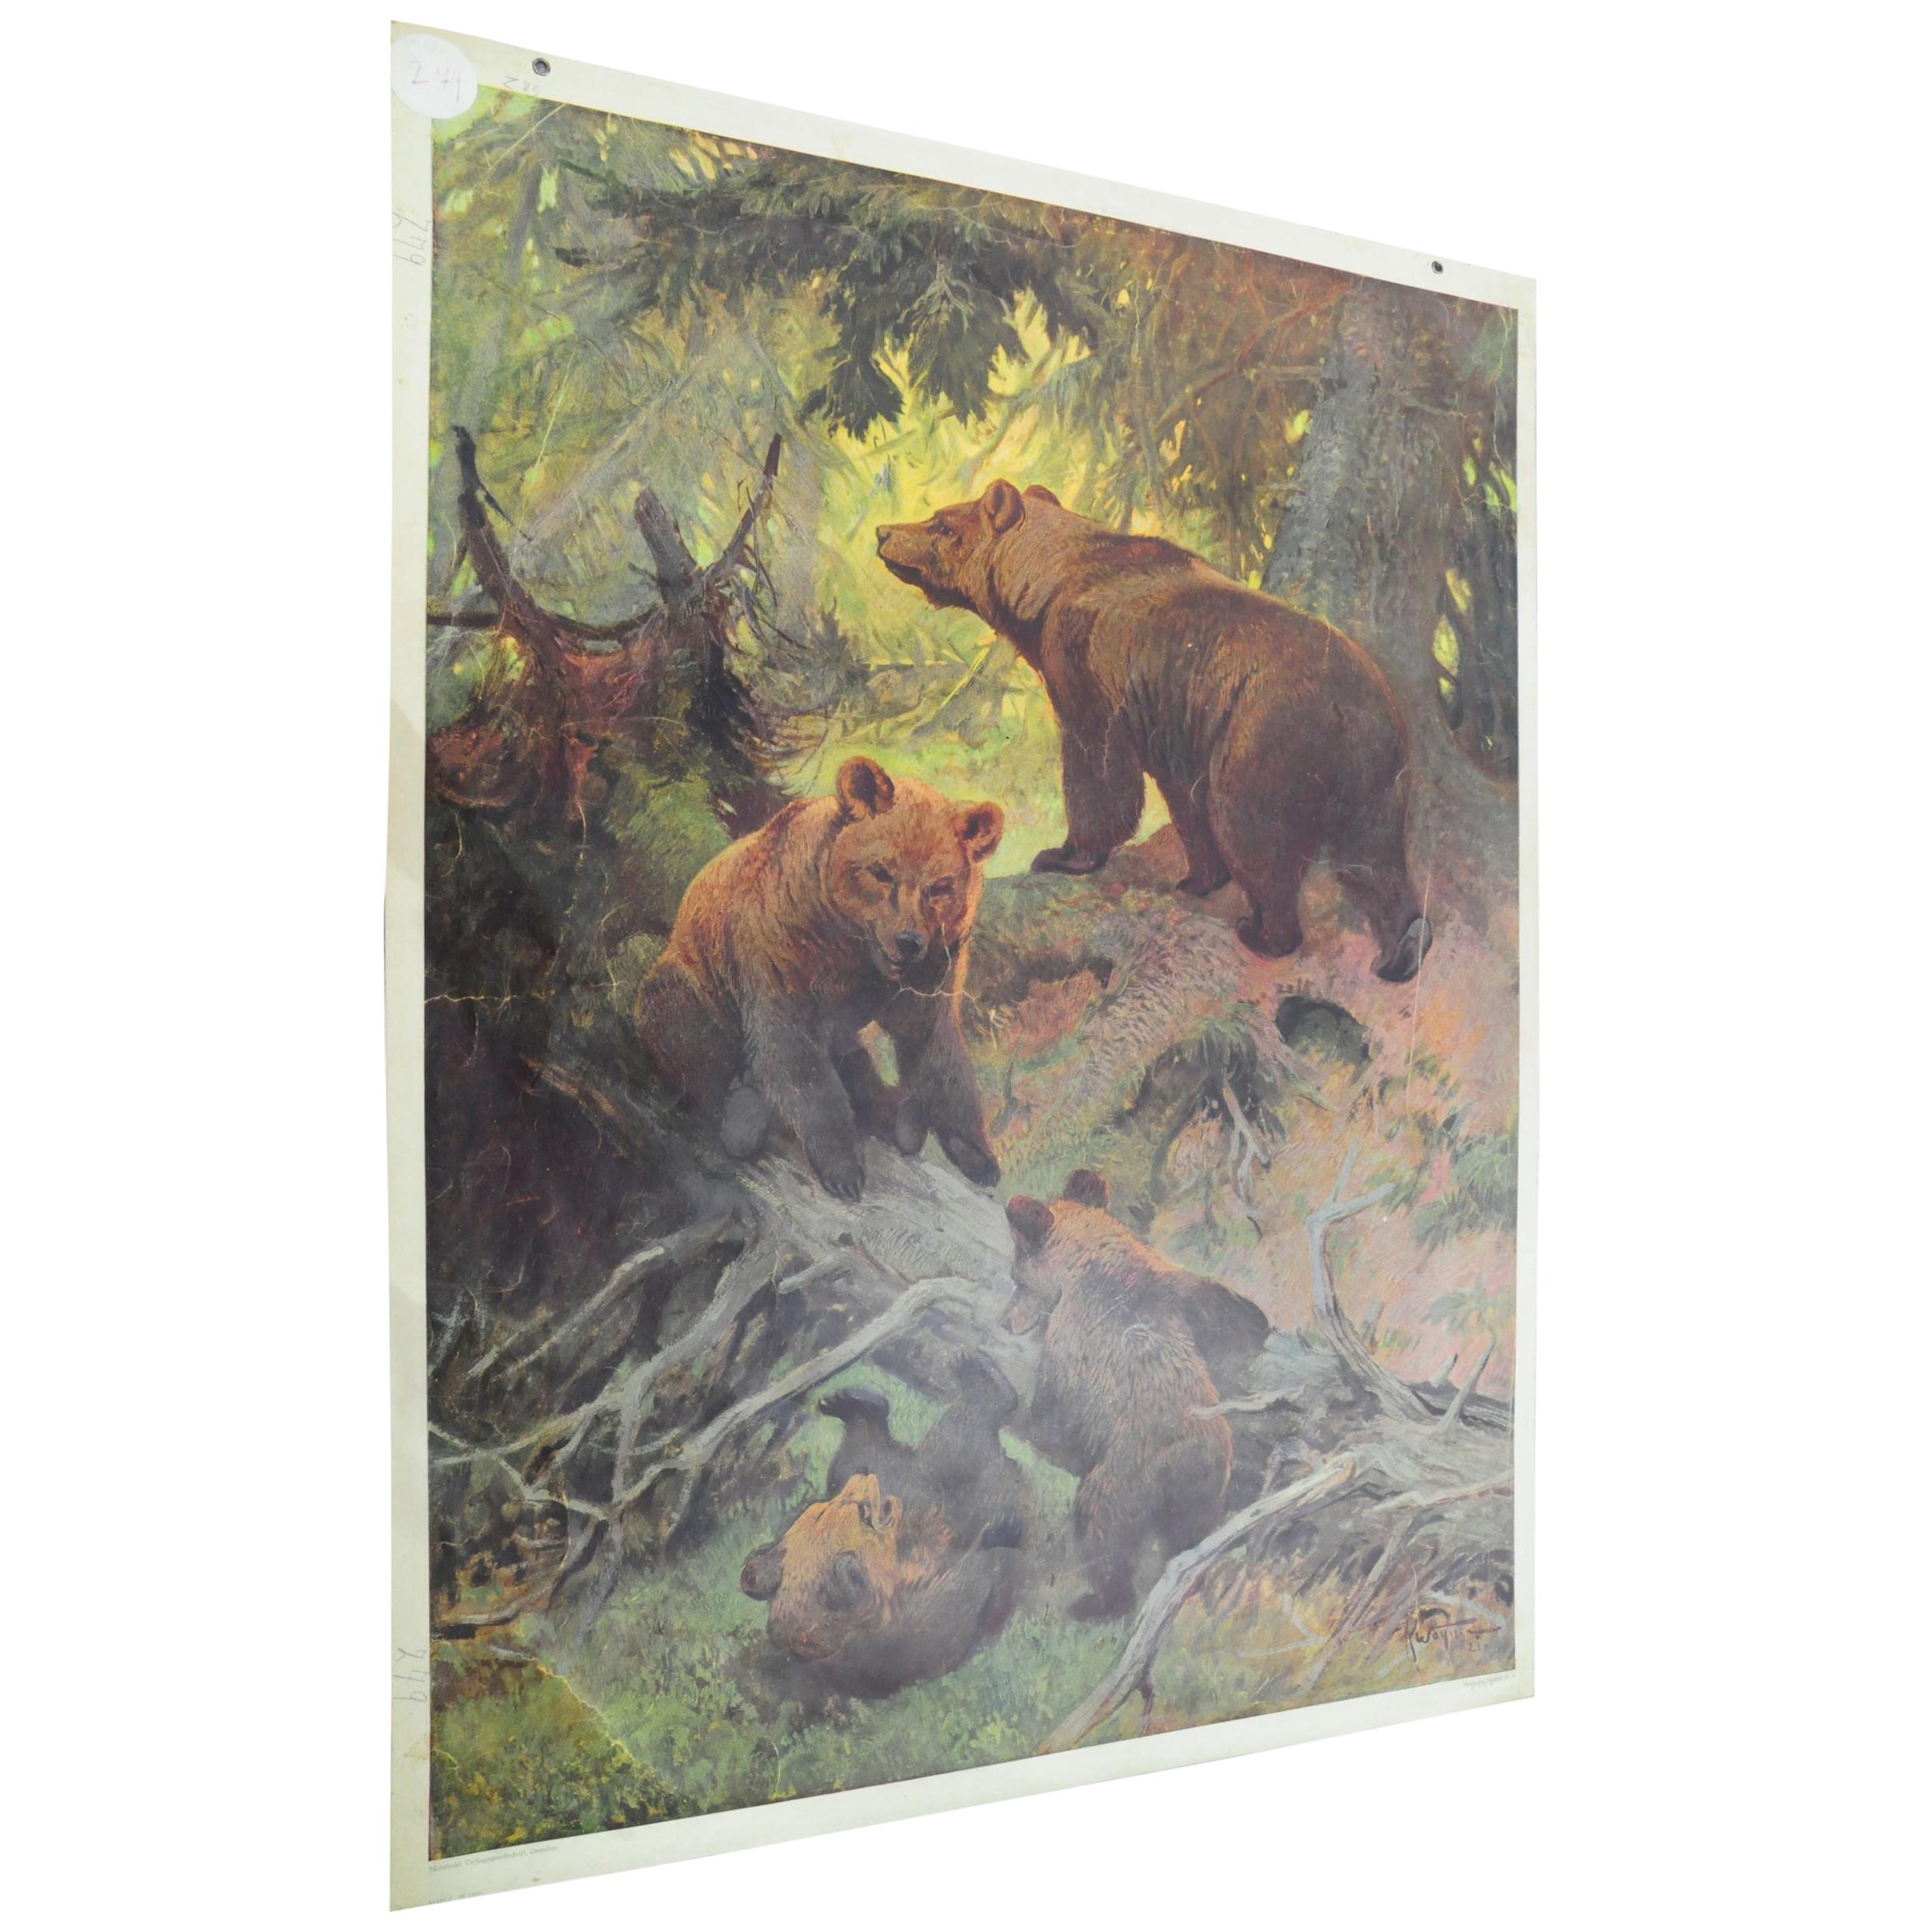 Countrycore Mural Vintage Cottagecore Printed Wall Chart Family of Brown Bears